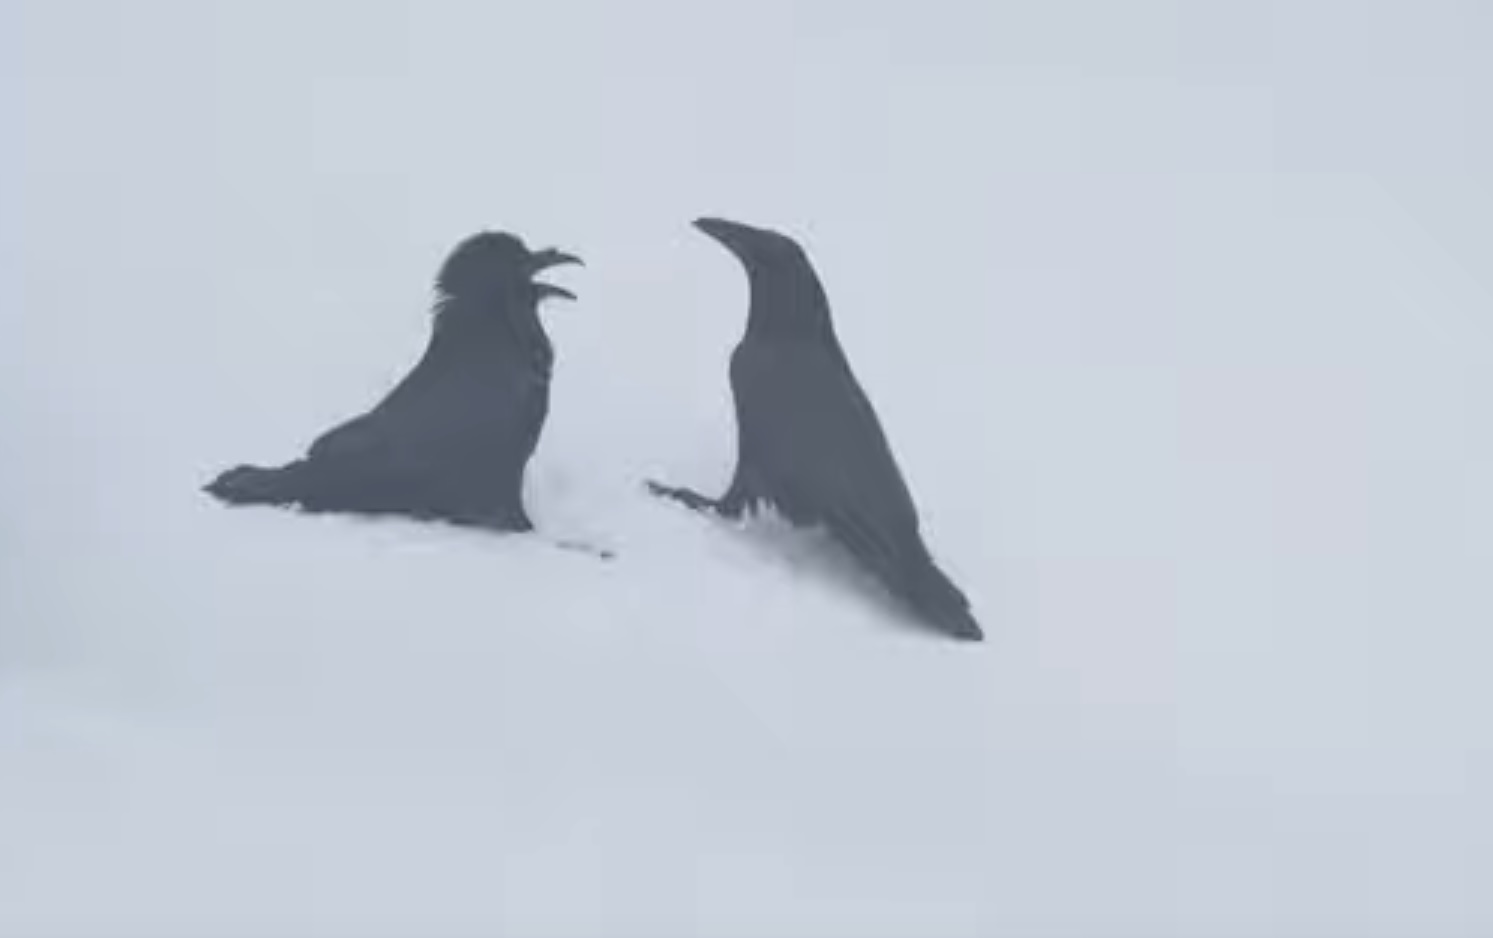 Ravens Playing In The Snow